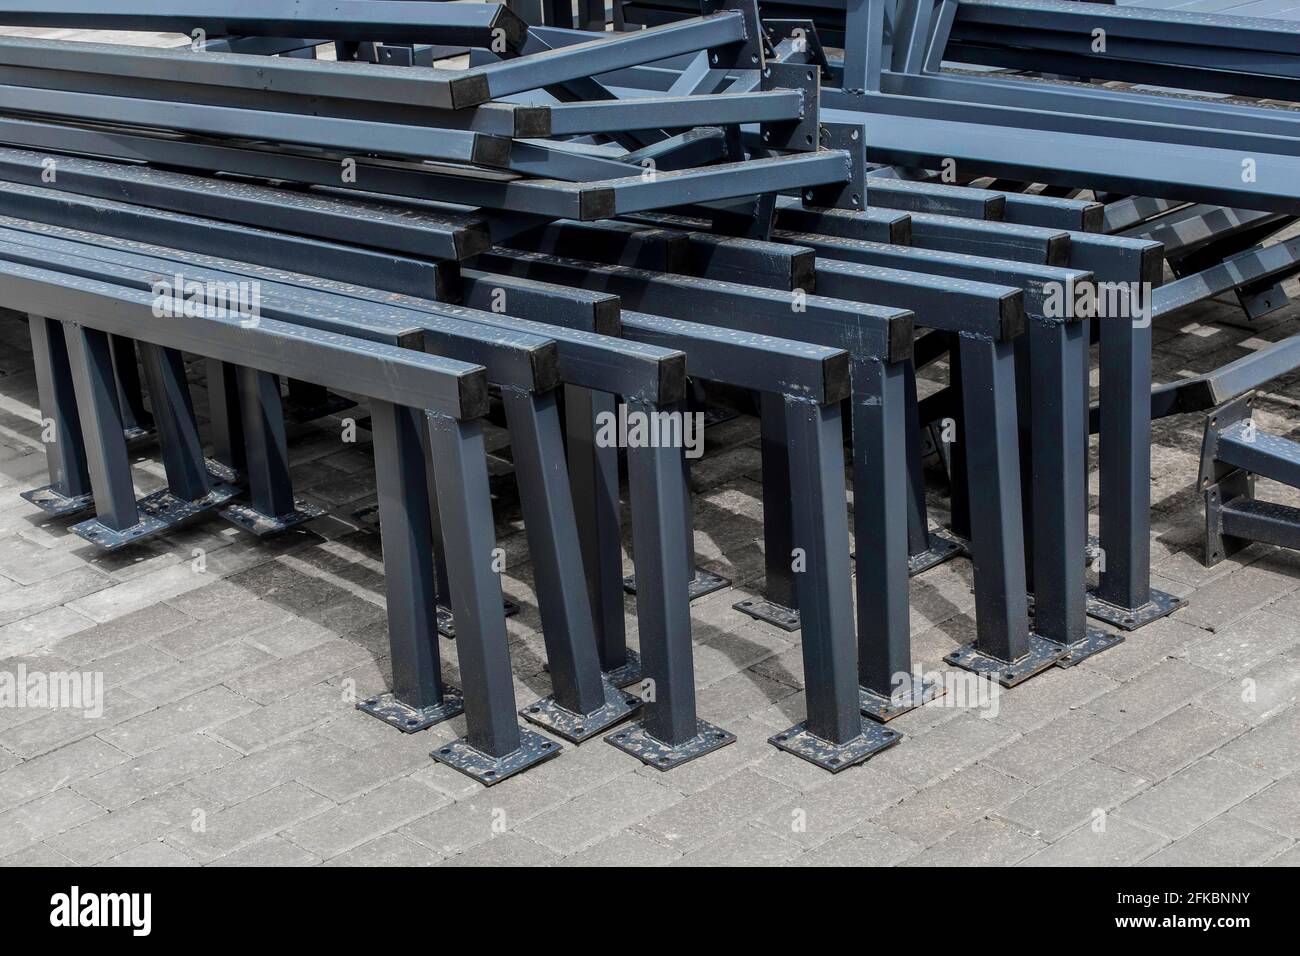 Pile of new metal structures or steel industrial material on paving slabs sidewalk at construction site. Stock Photo